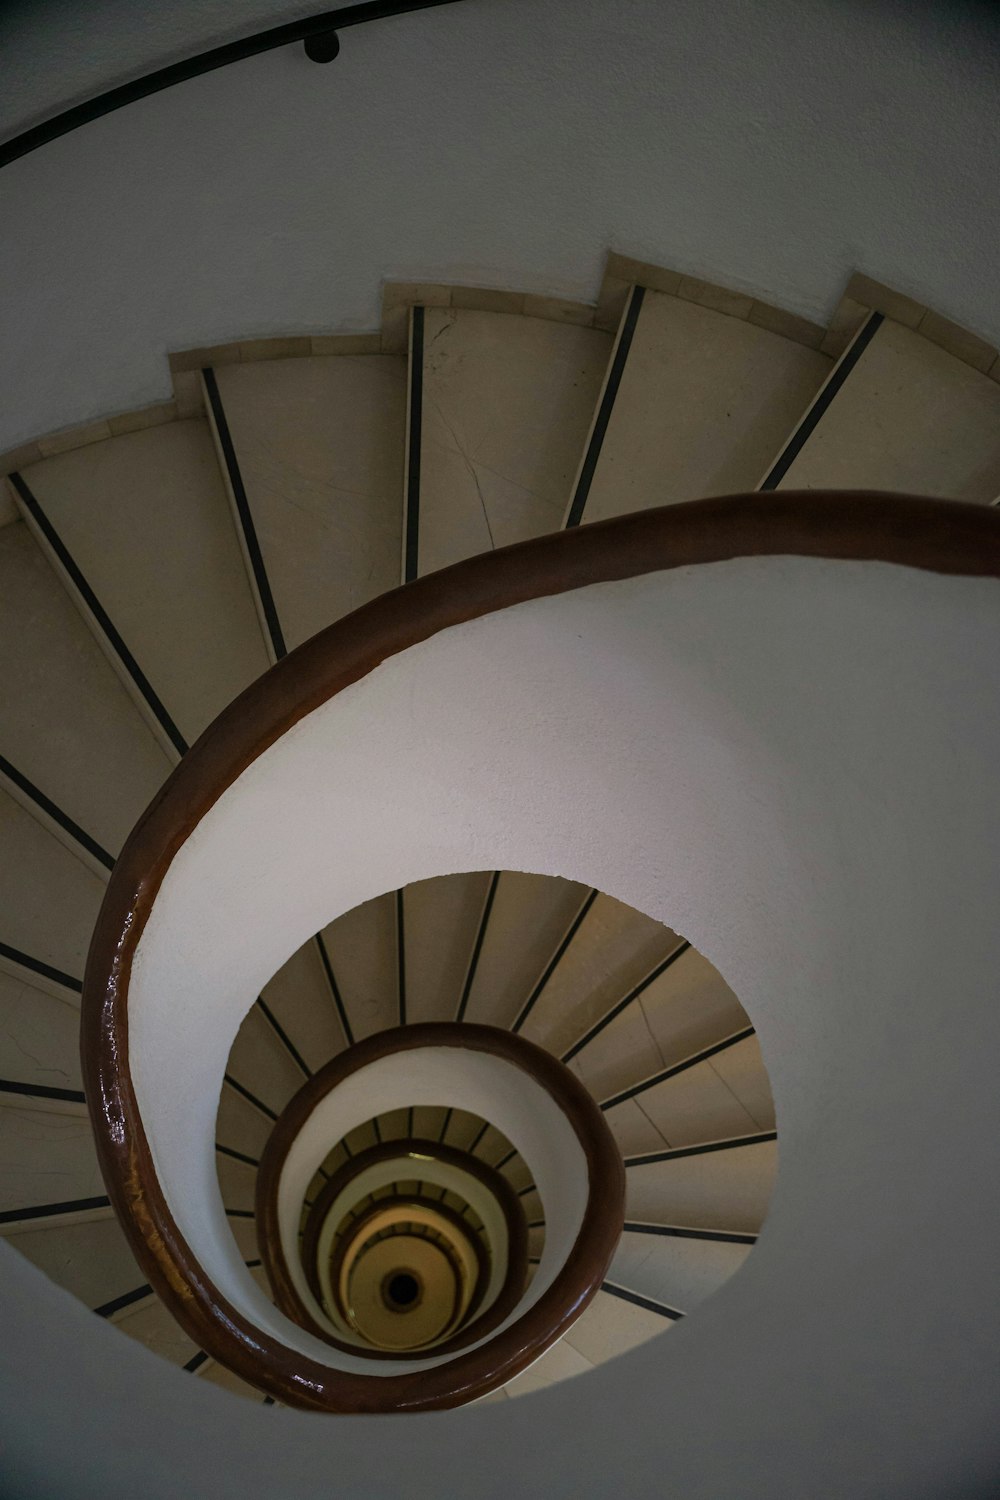 a spiral staircase in a building with white walls